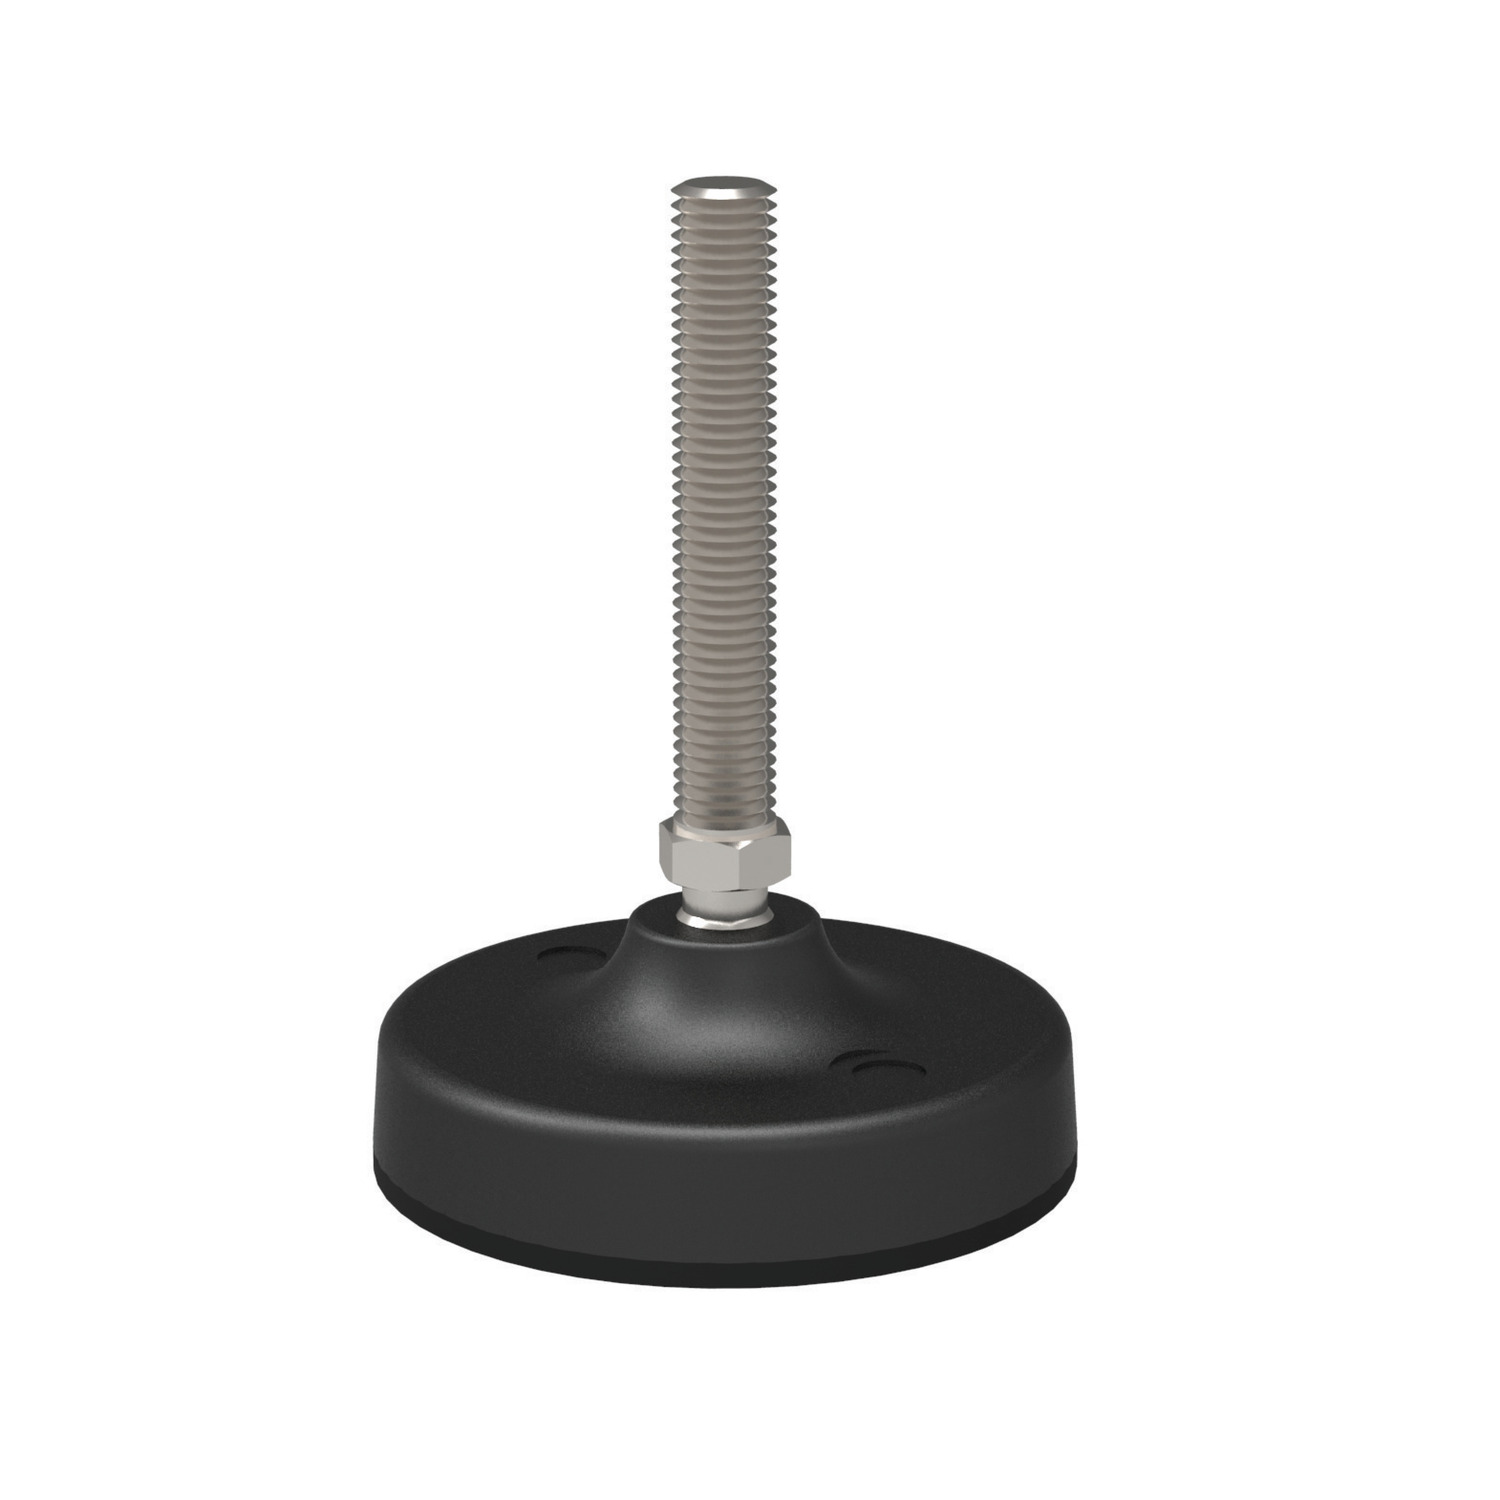 Product 34744, Levelling Feet bolt down option, bolt stainless steel / 